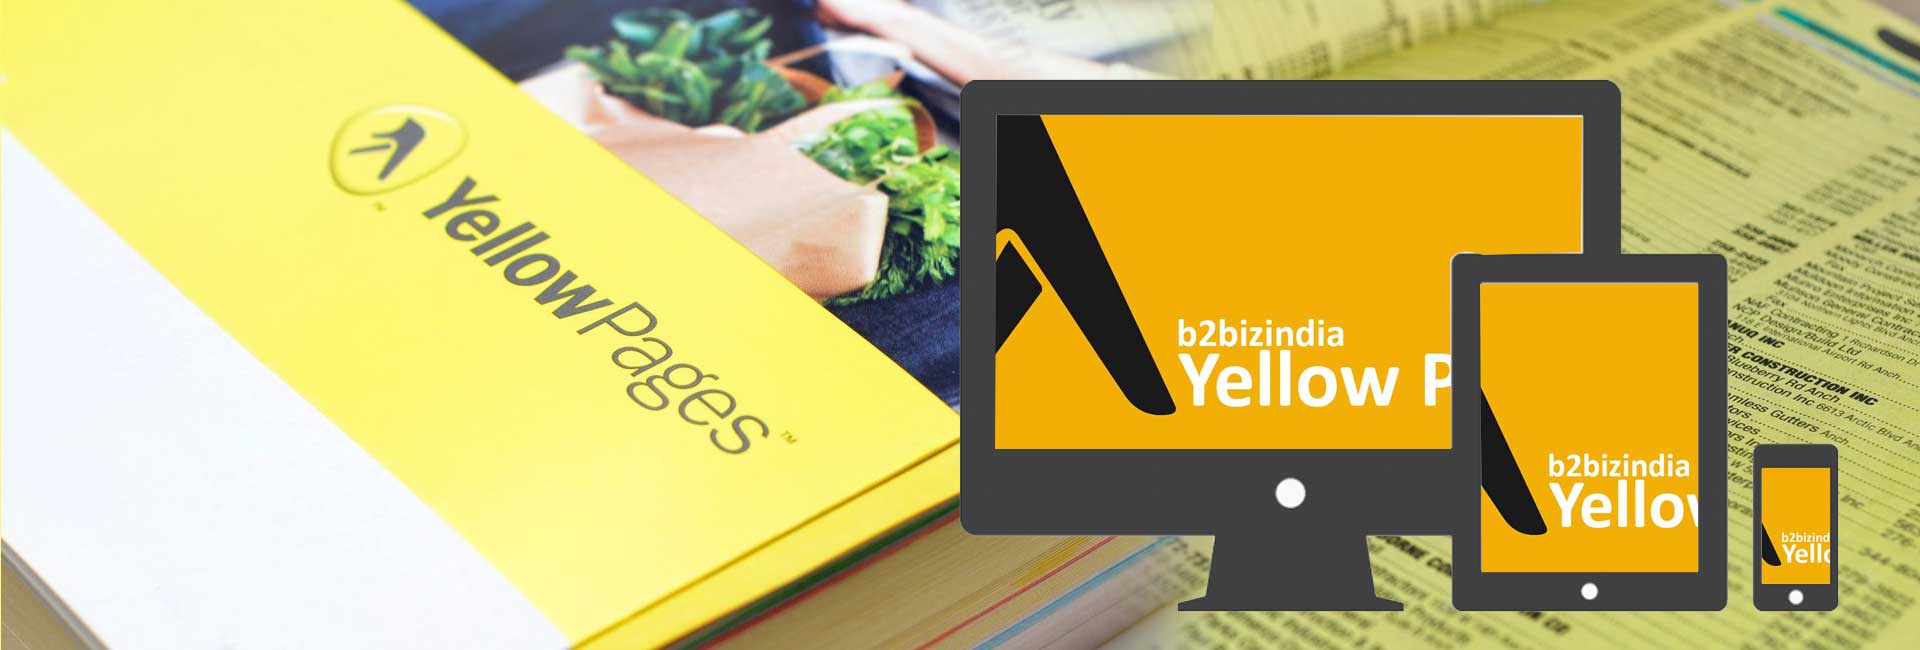 when-did-sprint-yellow-pages-buy-the-las-vegas-yellow-page-company